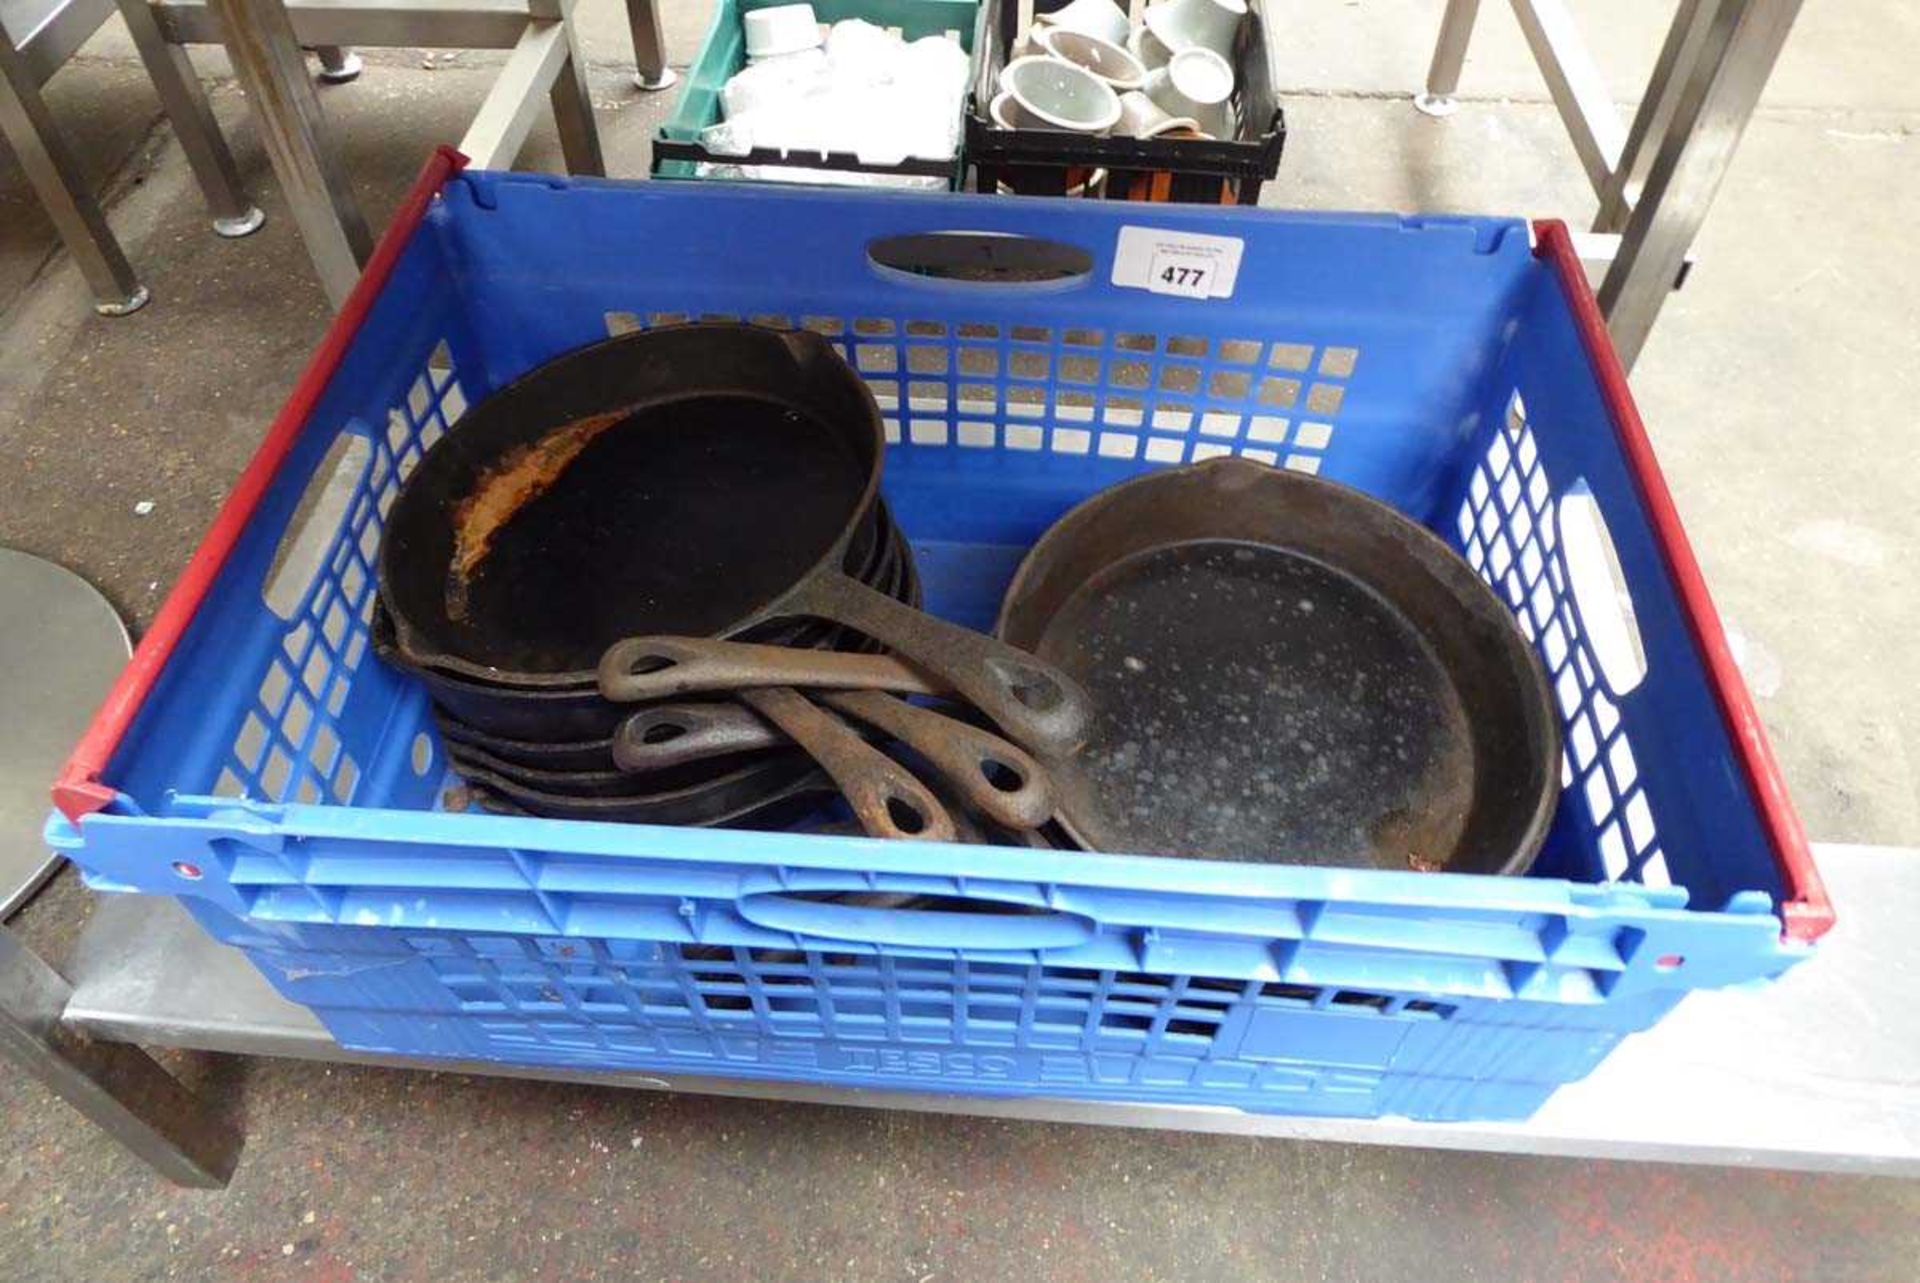 +VAT Plastic stacking crate with heavy skillets